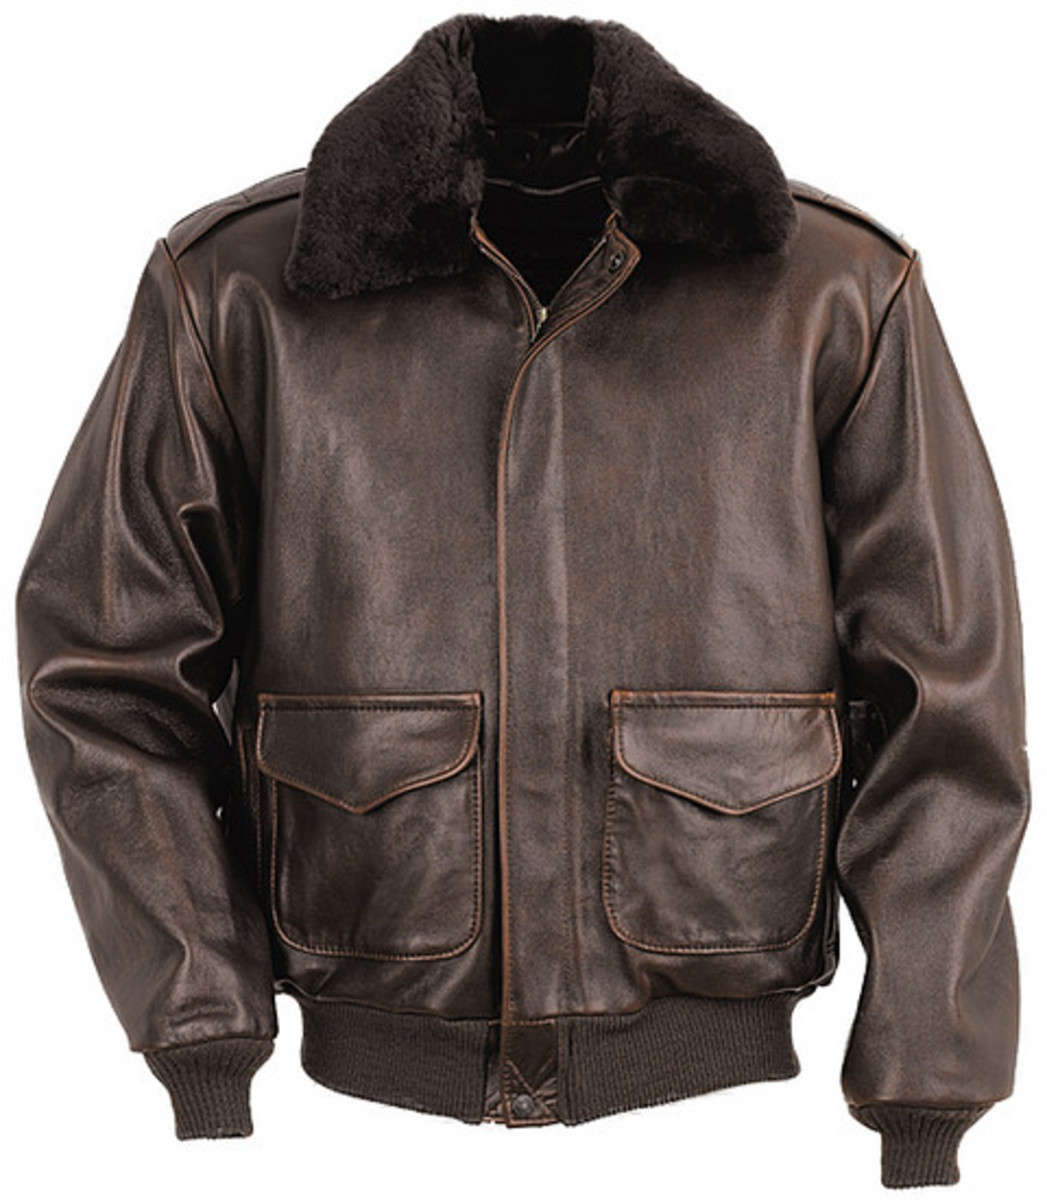 10 Variations on How to Wear the Leather Bomber Jacket | HubPages